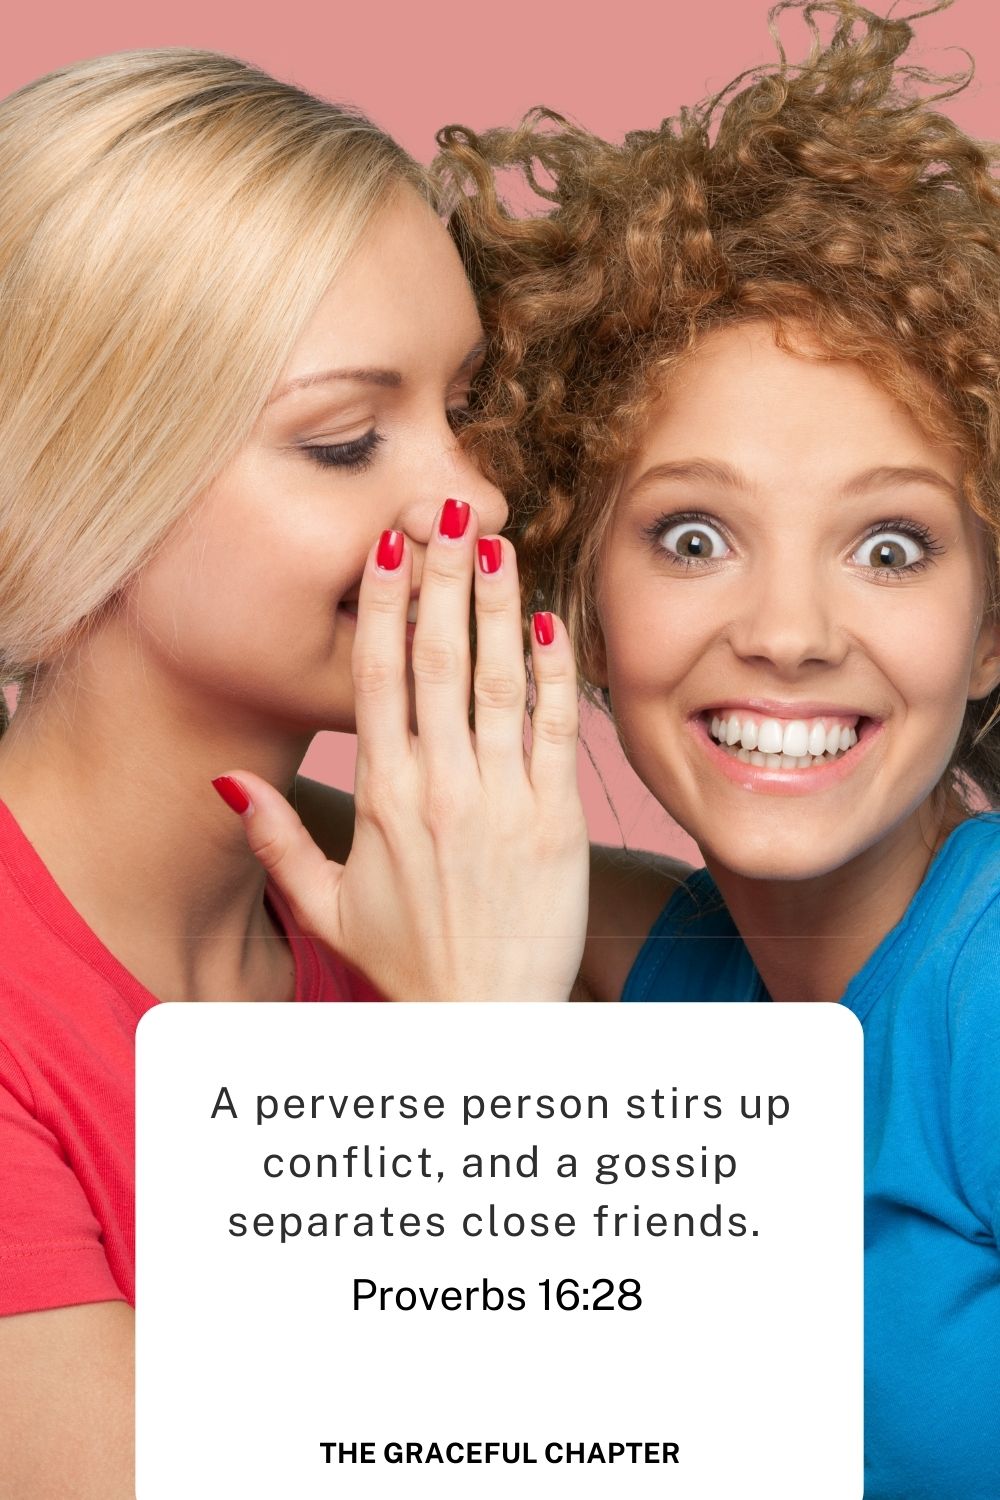 A perverse person stirs up conflict, and a gossip separates close friends. 
Proverbs 16:28